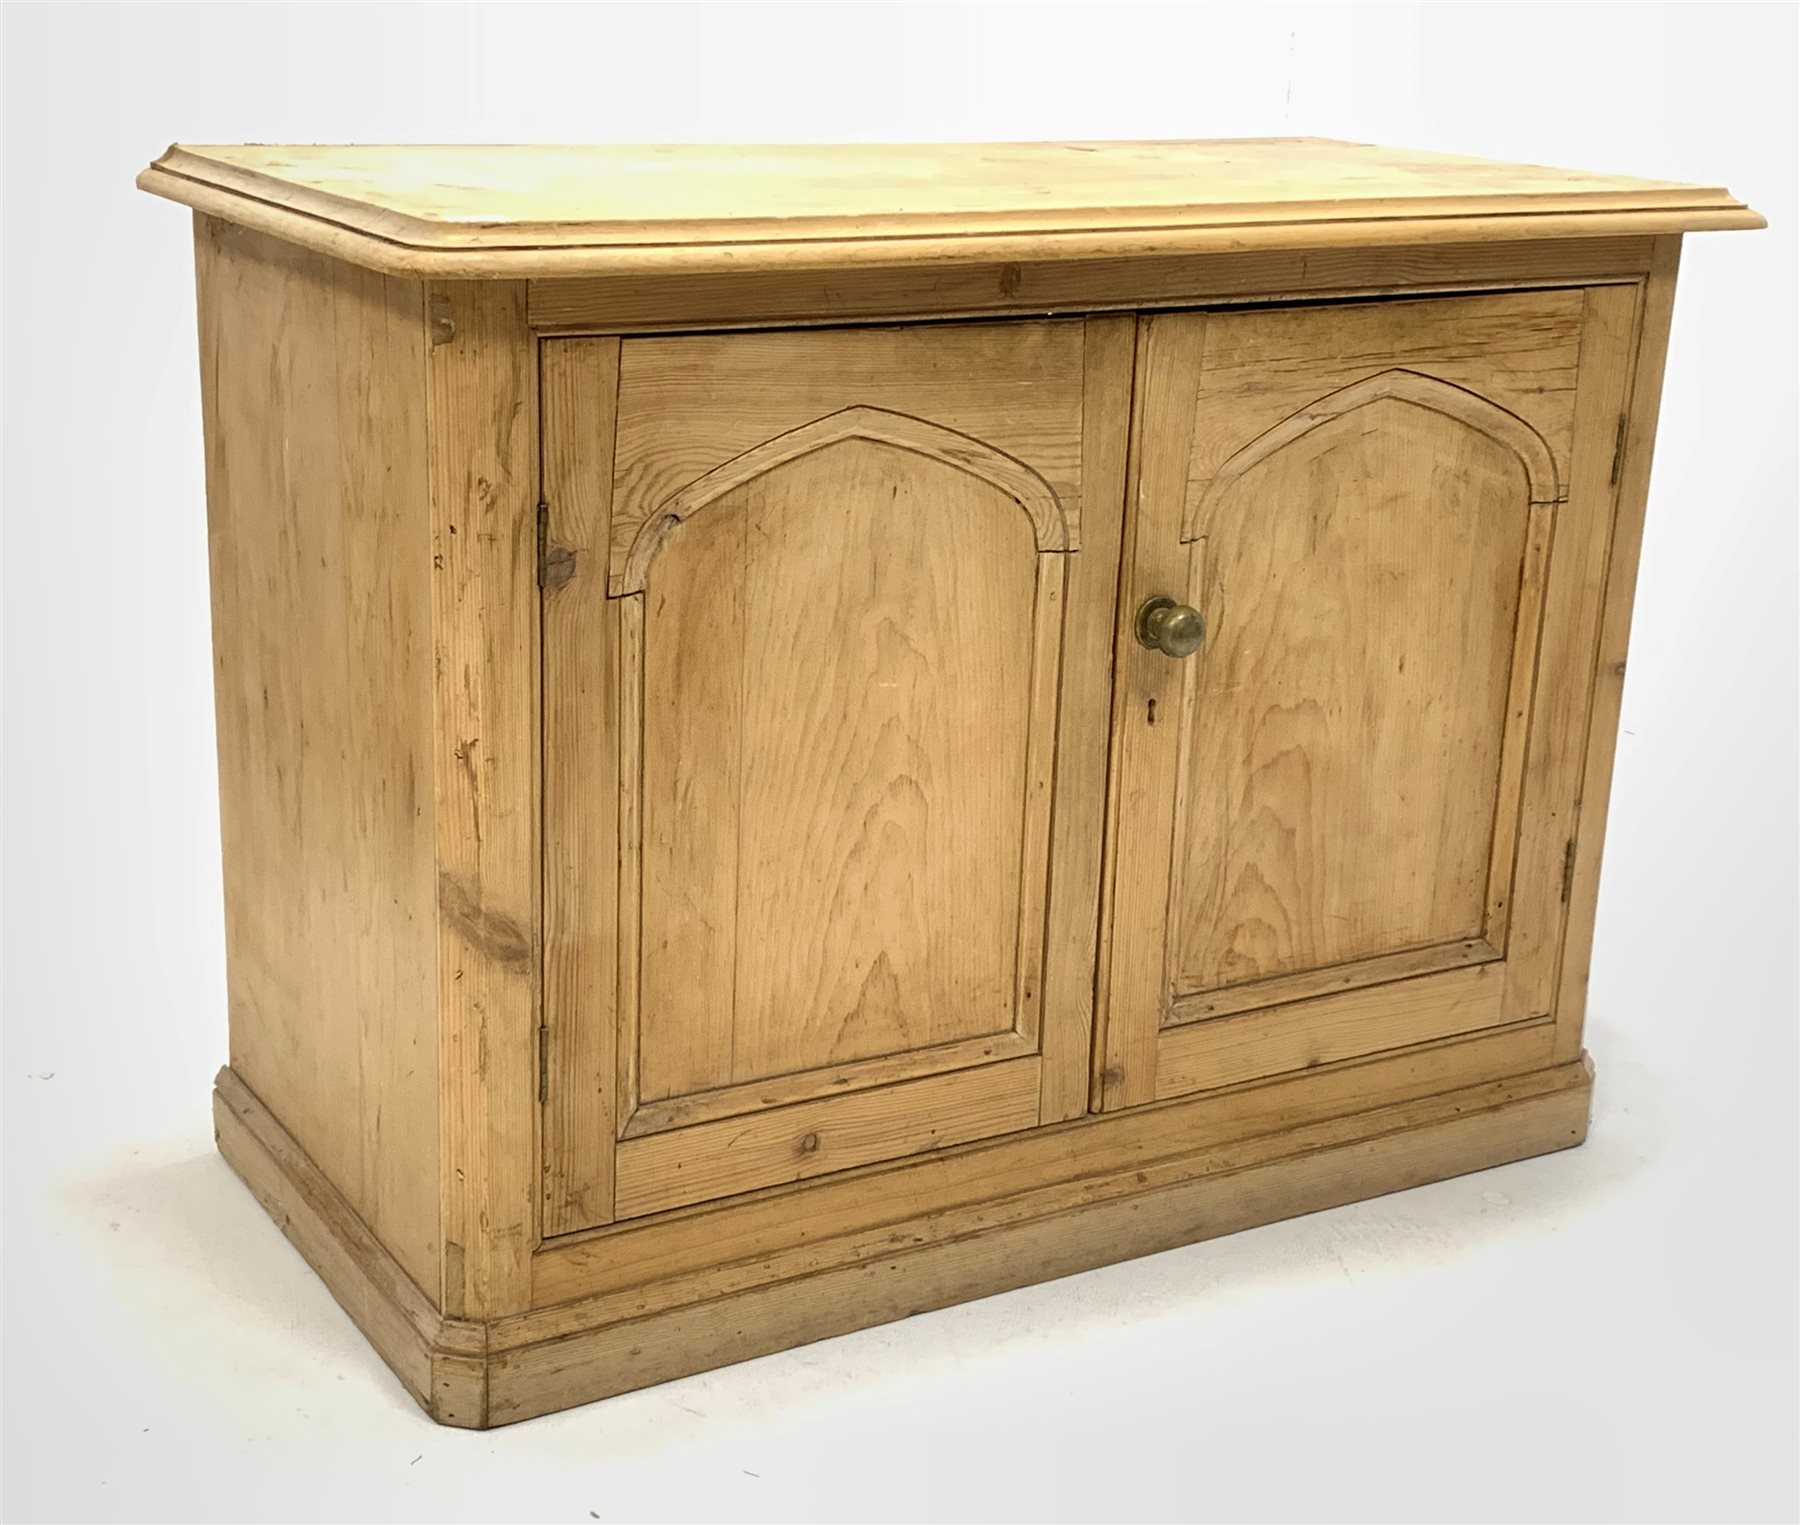 Victorian pine side cabinet, moulded top over double fielded panelled doors enclosing shelves, skirt